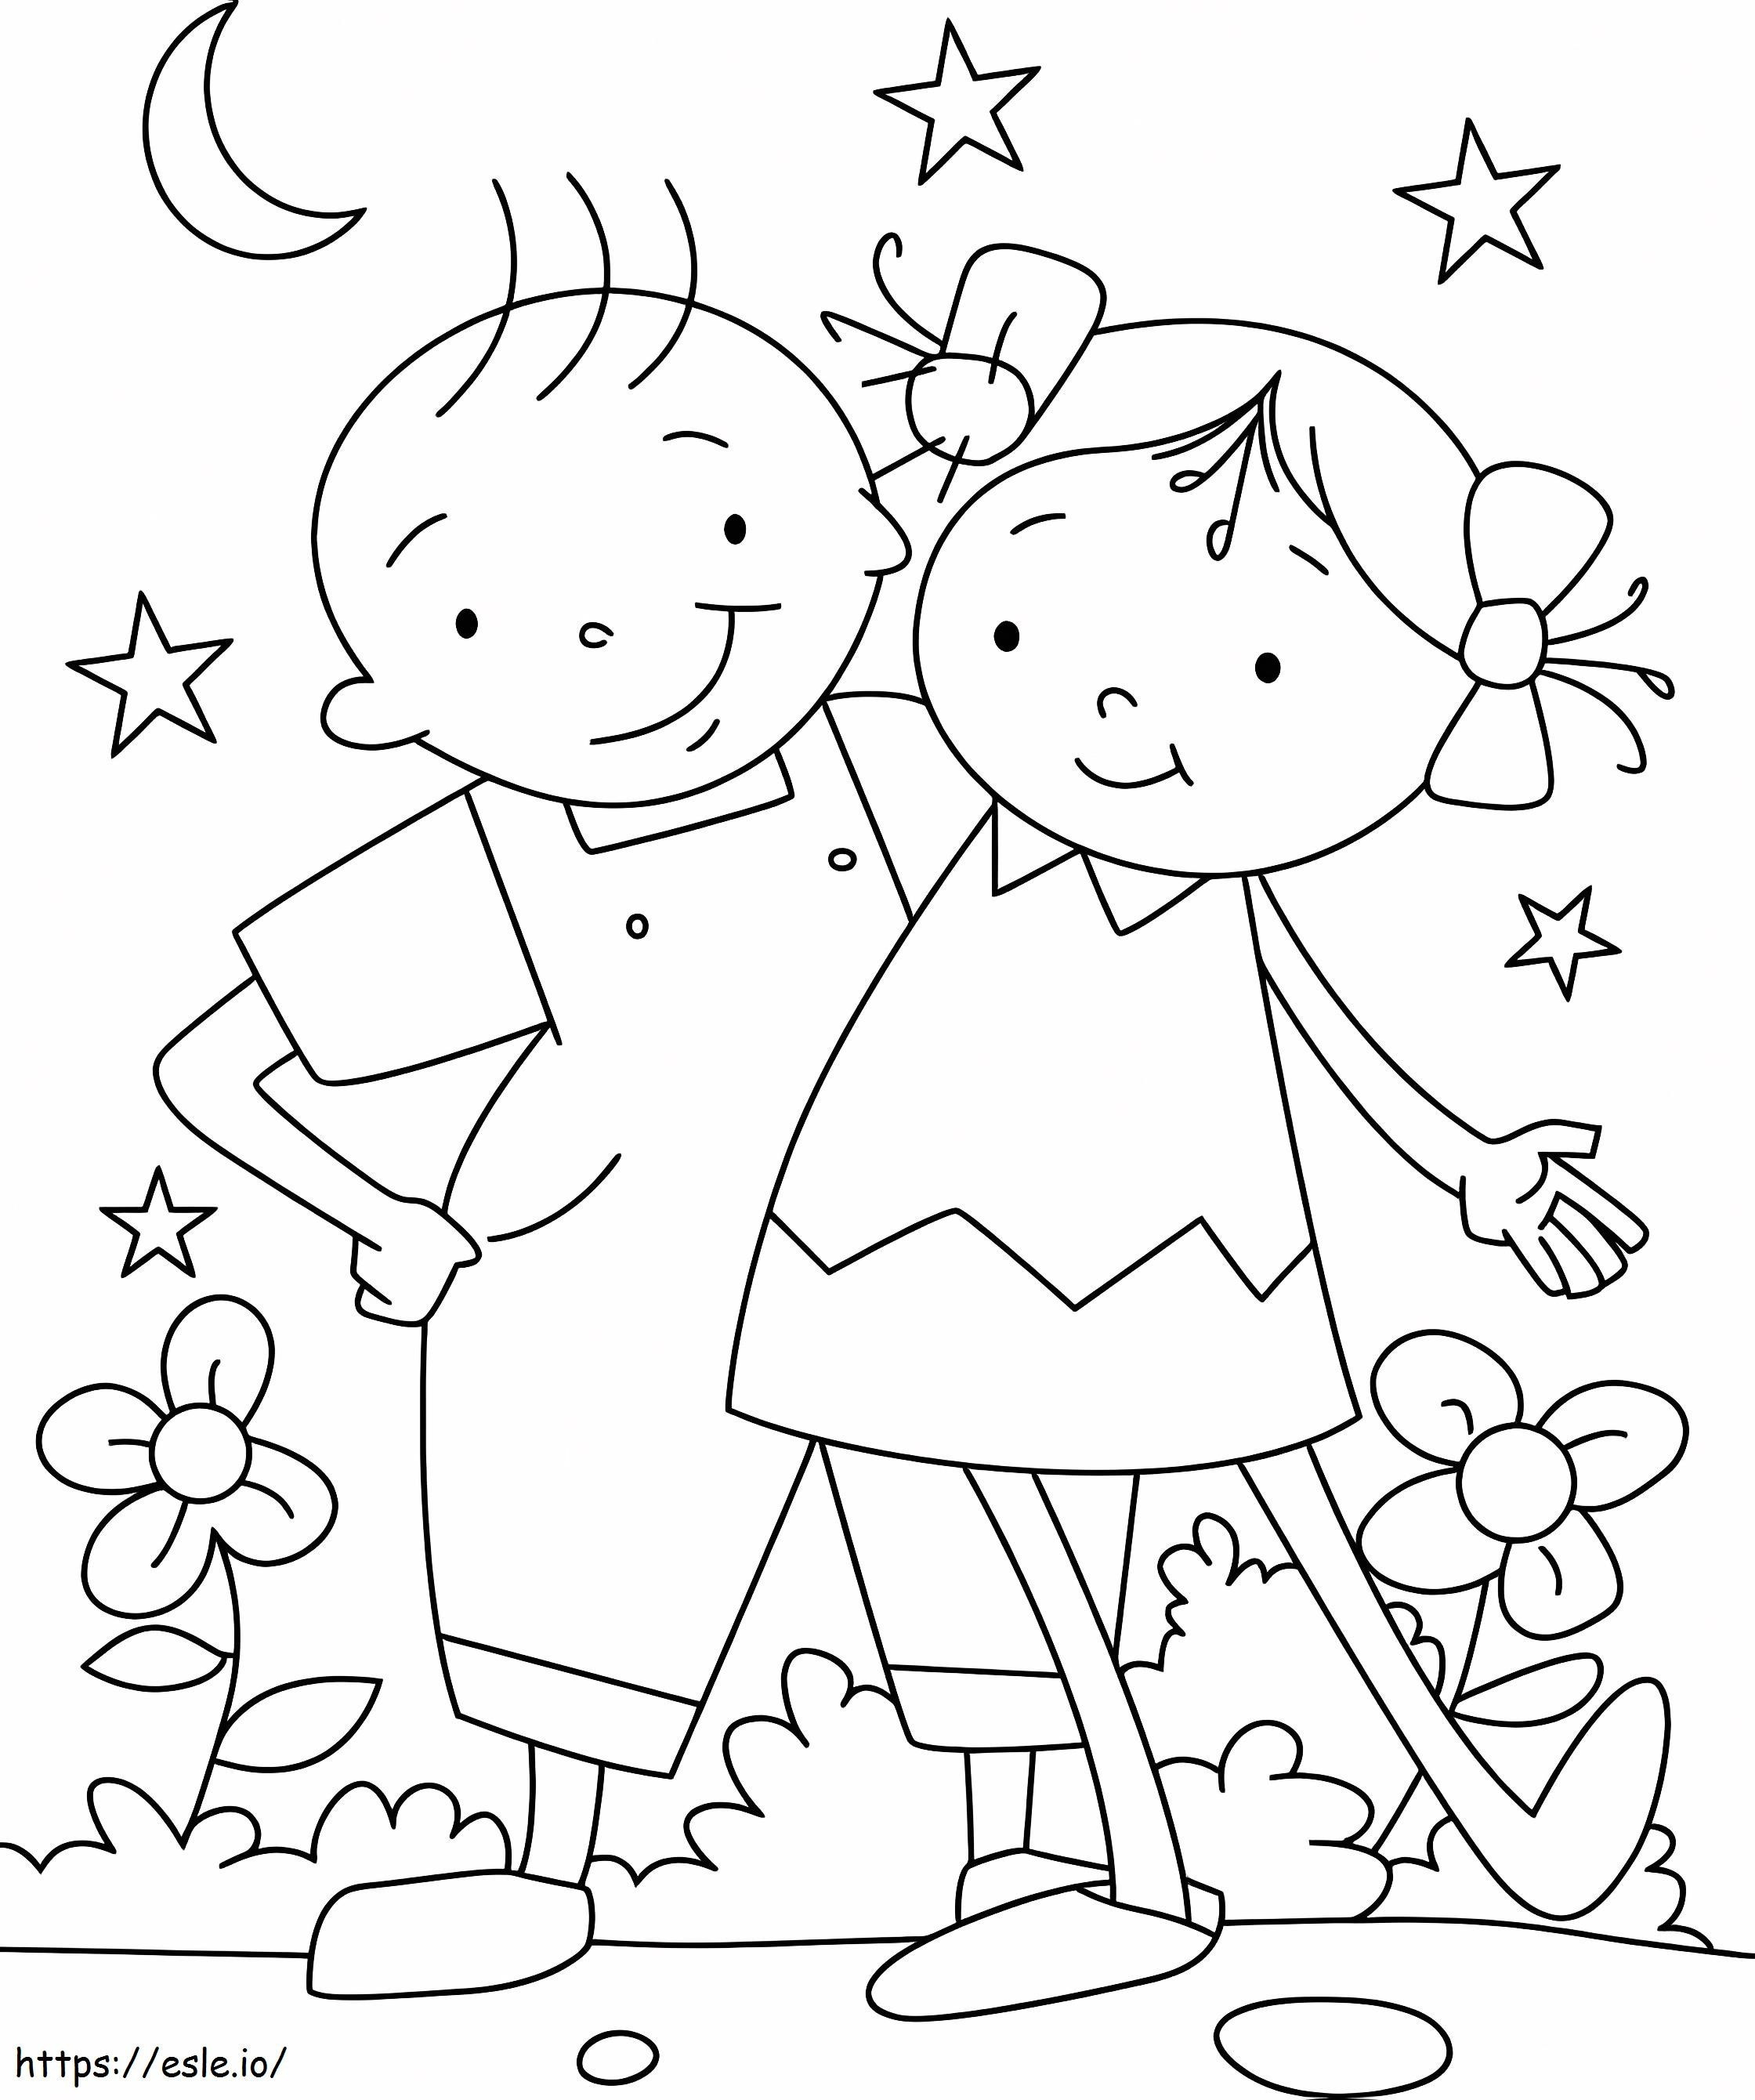 Two Friends Hugging coloring page